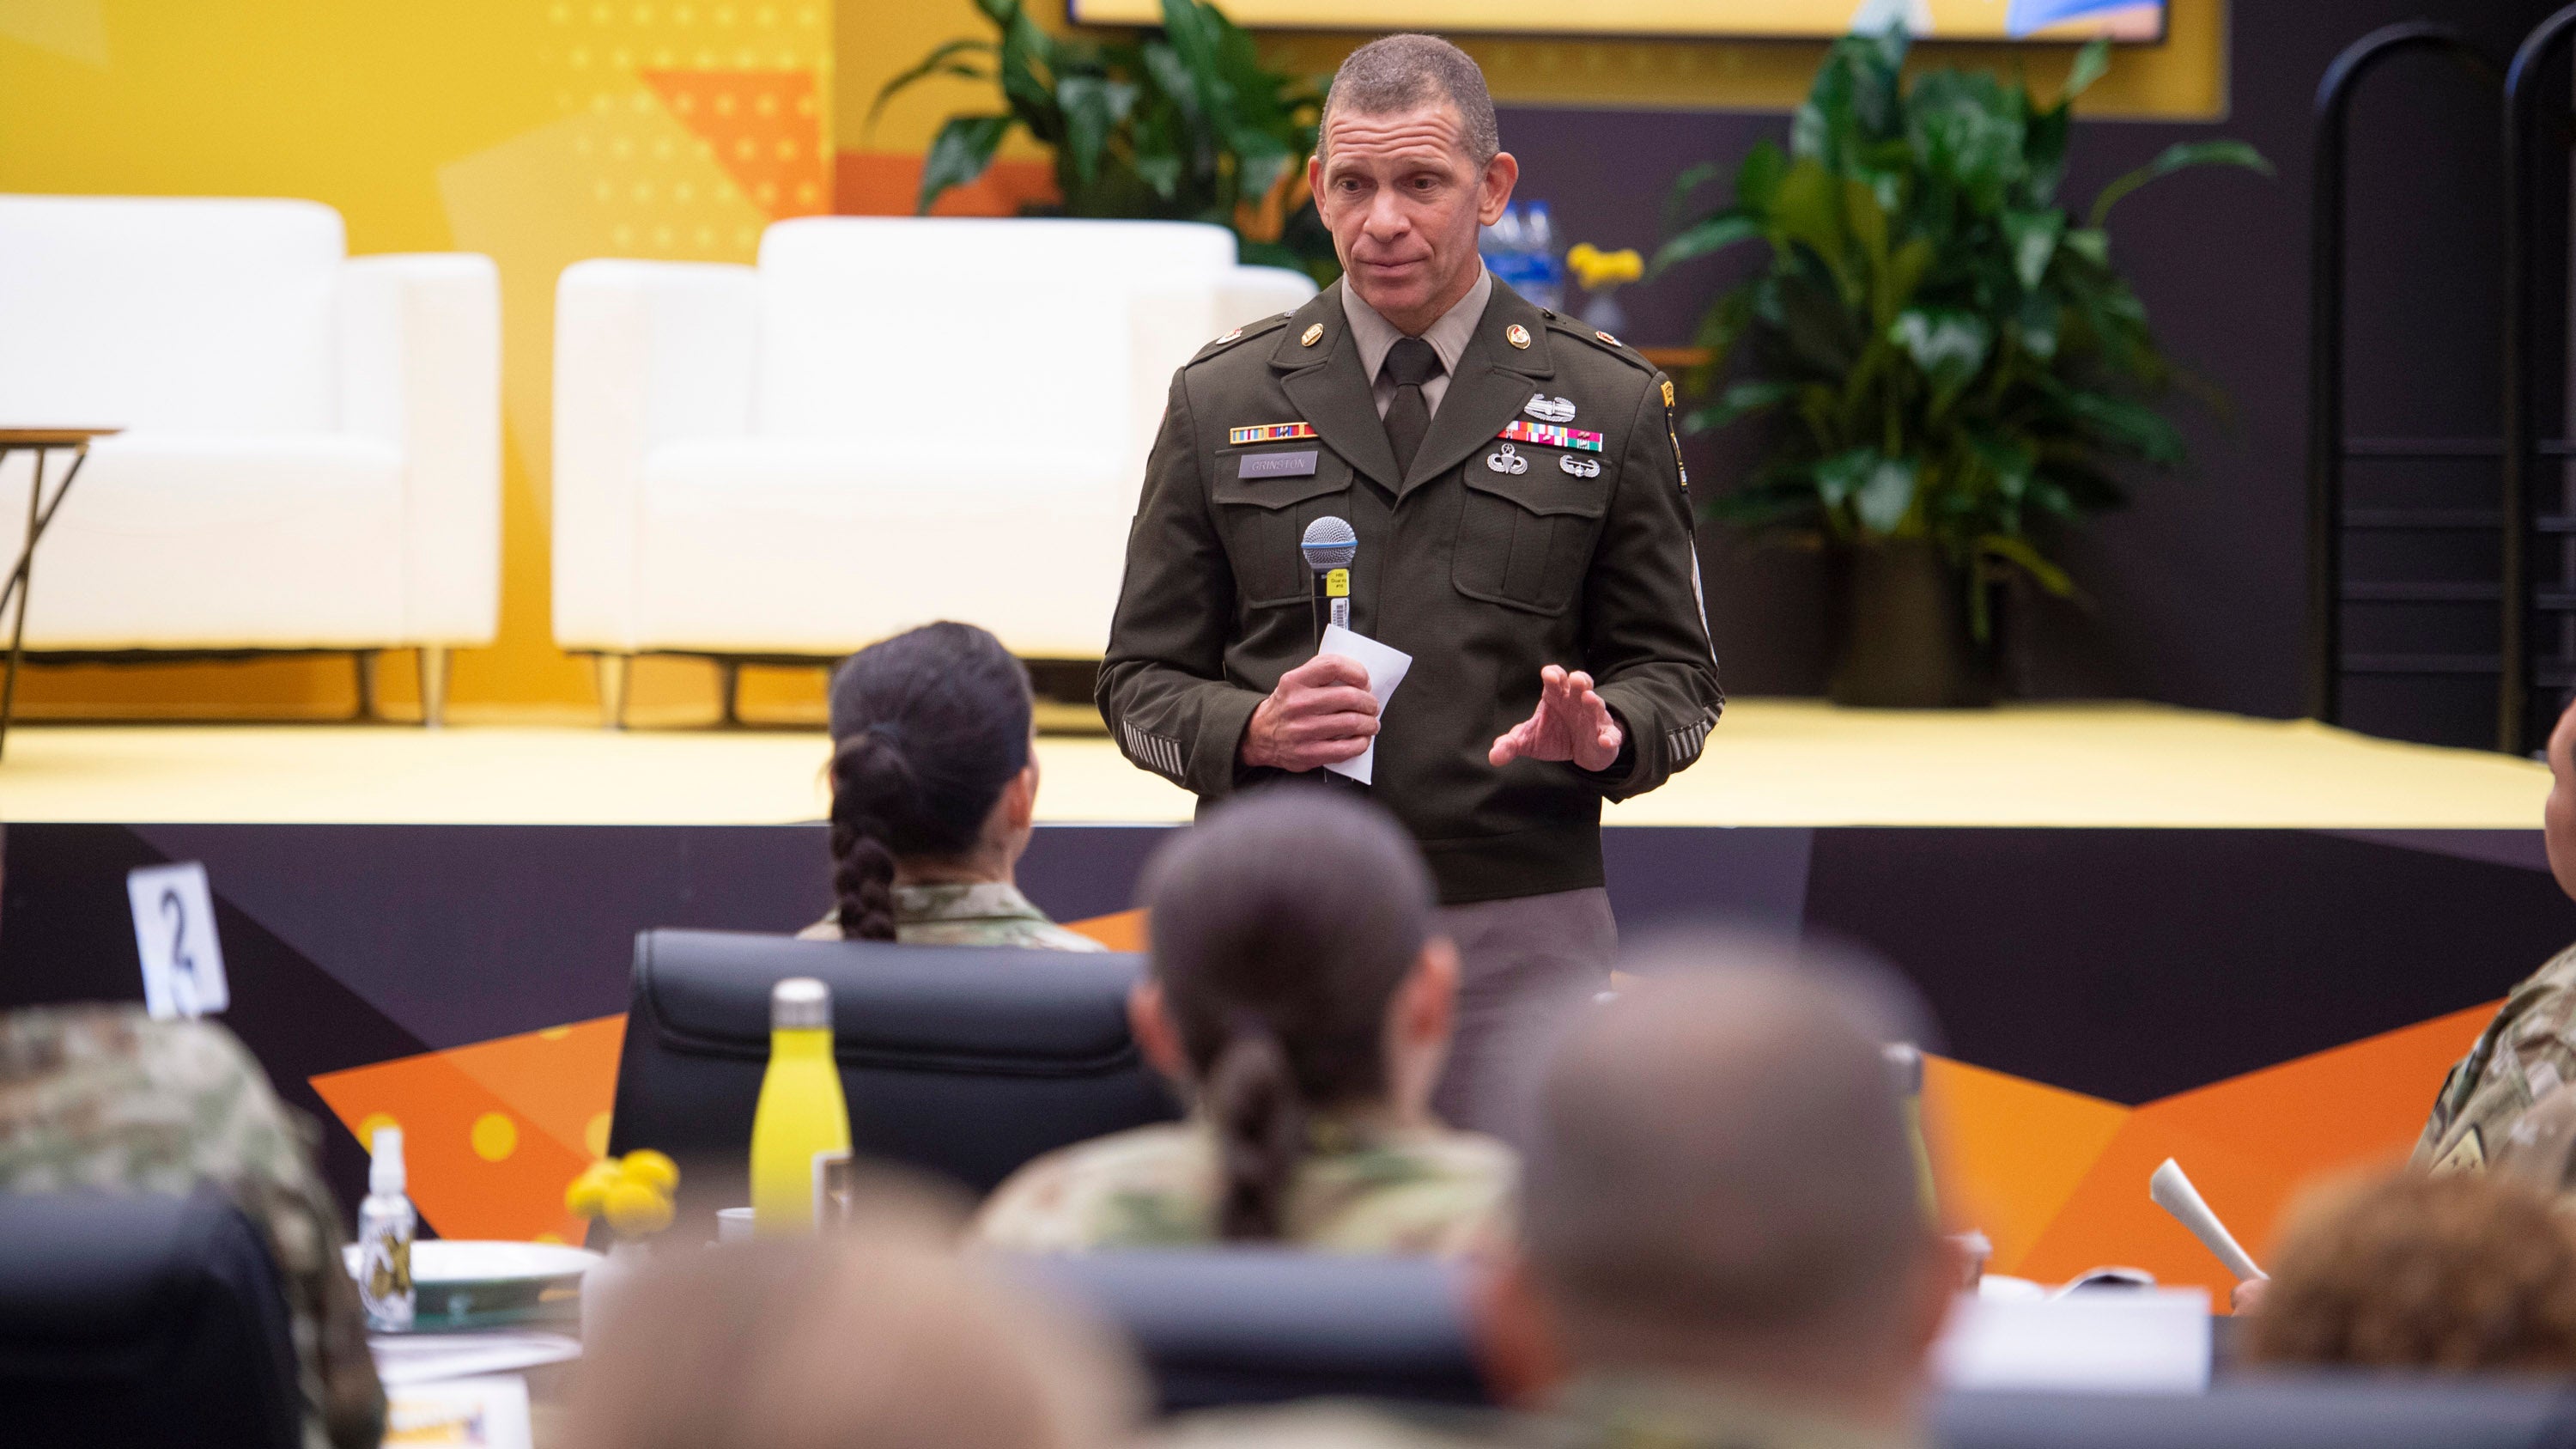 Sergeant Major of the Army Michael Grinston speaks at the Leader Solarium at AUSA 2022 Annual Meeting in Washington, D.C., Tuesday, Oct. 11, 2022. (Rod Lamkey for AUSA)